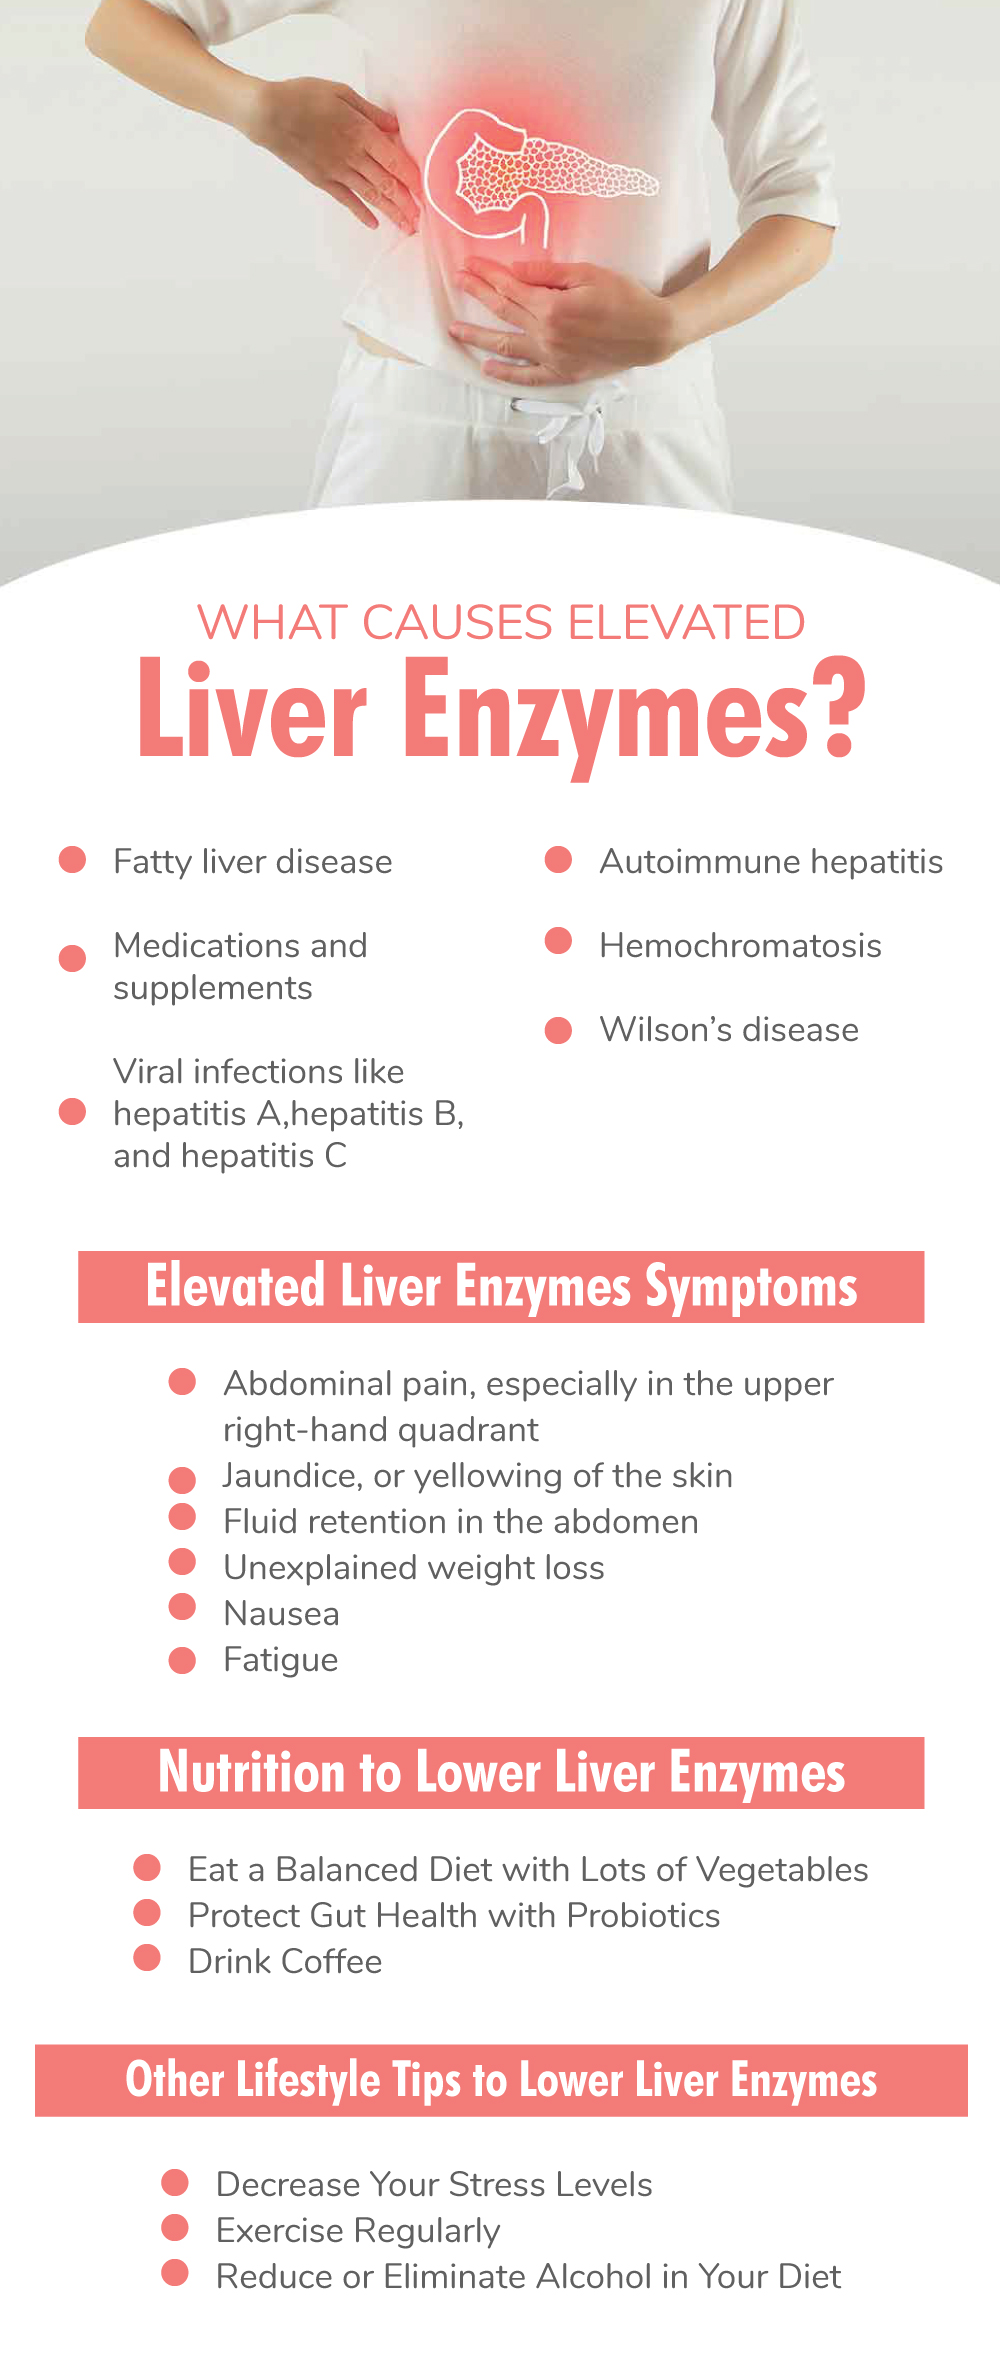 What Causes Elevated Liver Enzymes?